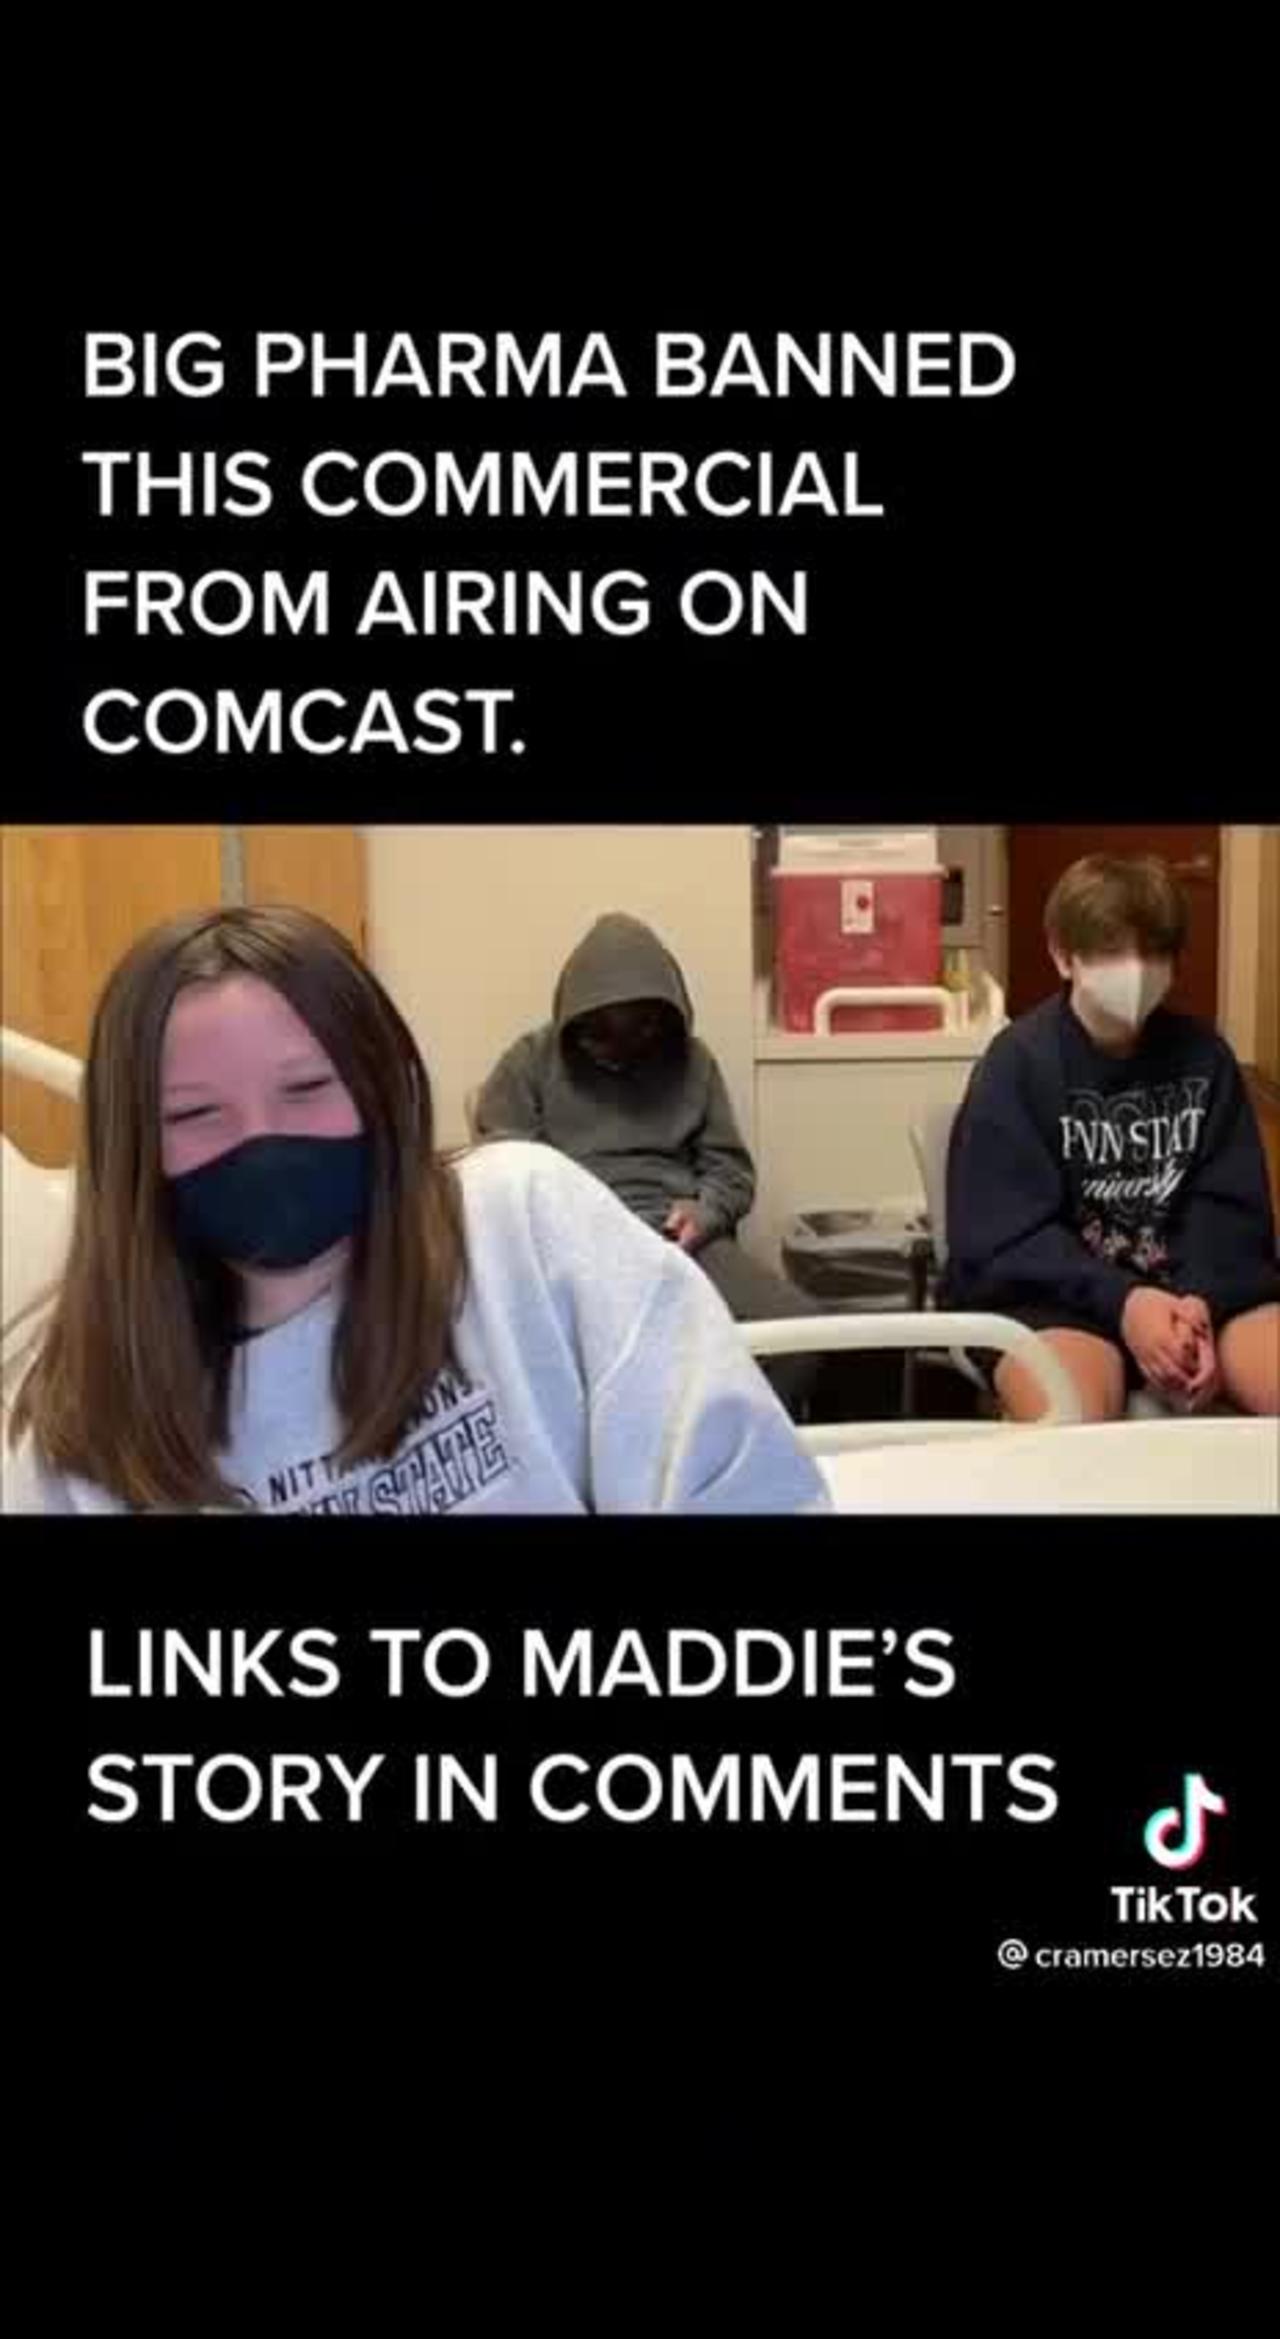 Poor Maddie.. the genocidal globalists have a lot to answer for...